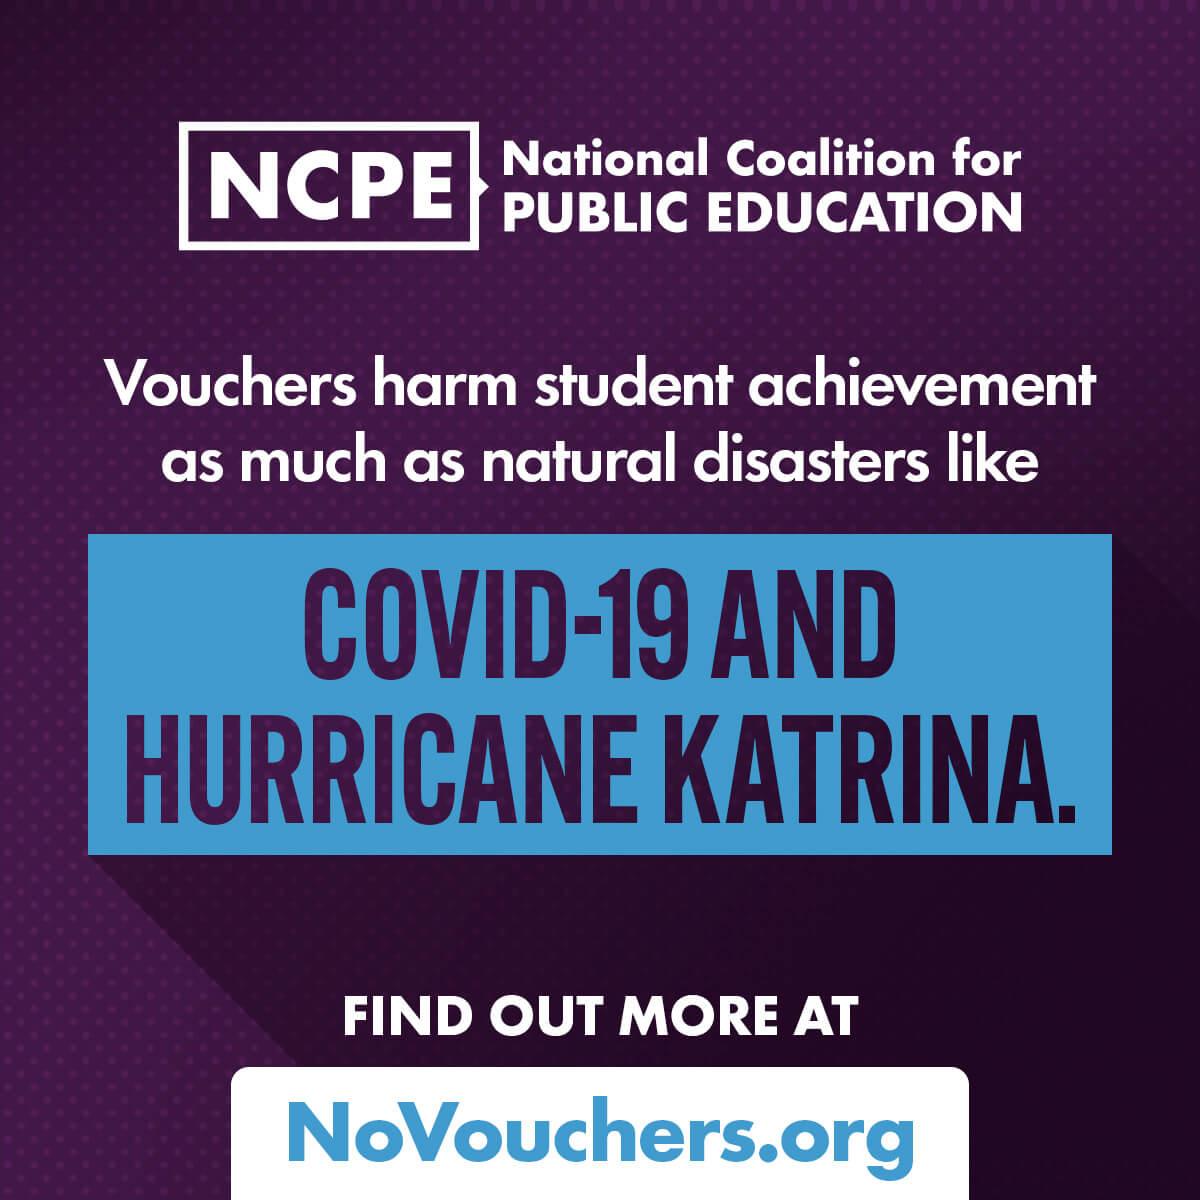 Vouchers harm student achievement as much as natural disasters